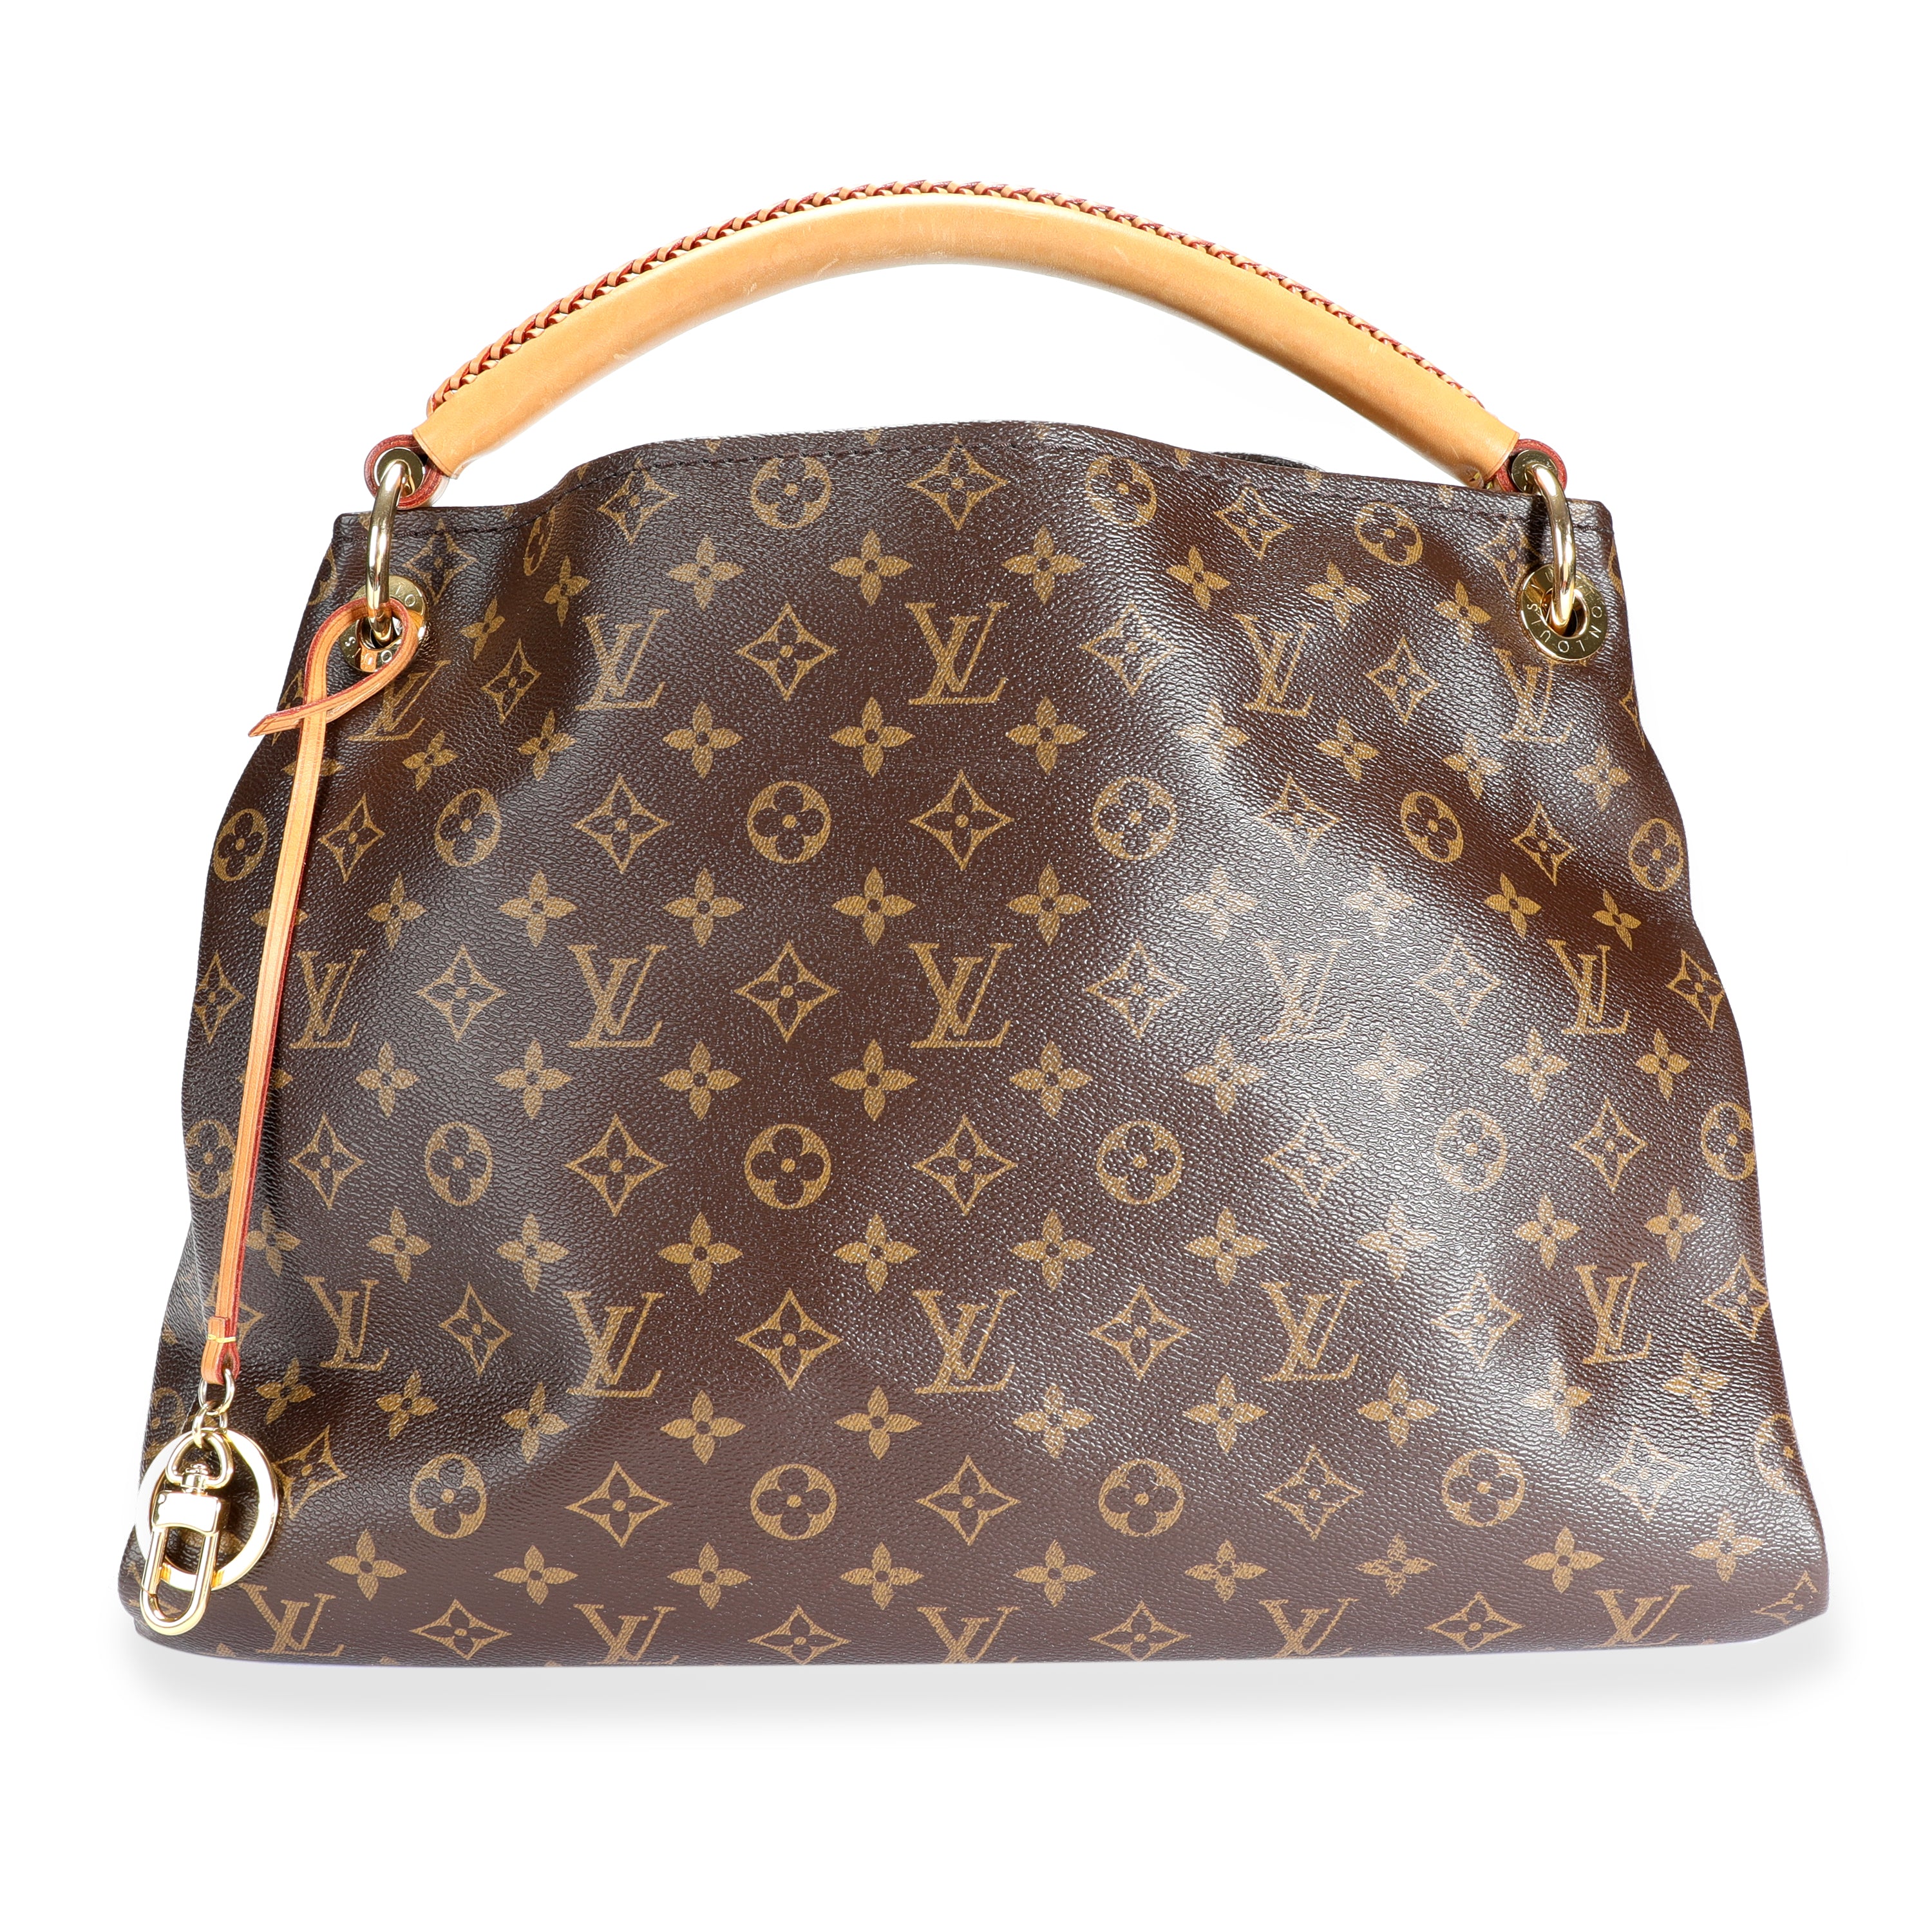  A Guide to Authenticating the Louis Vuitton Artsy